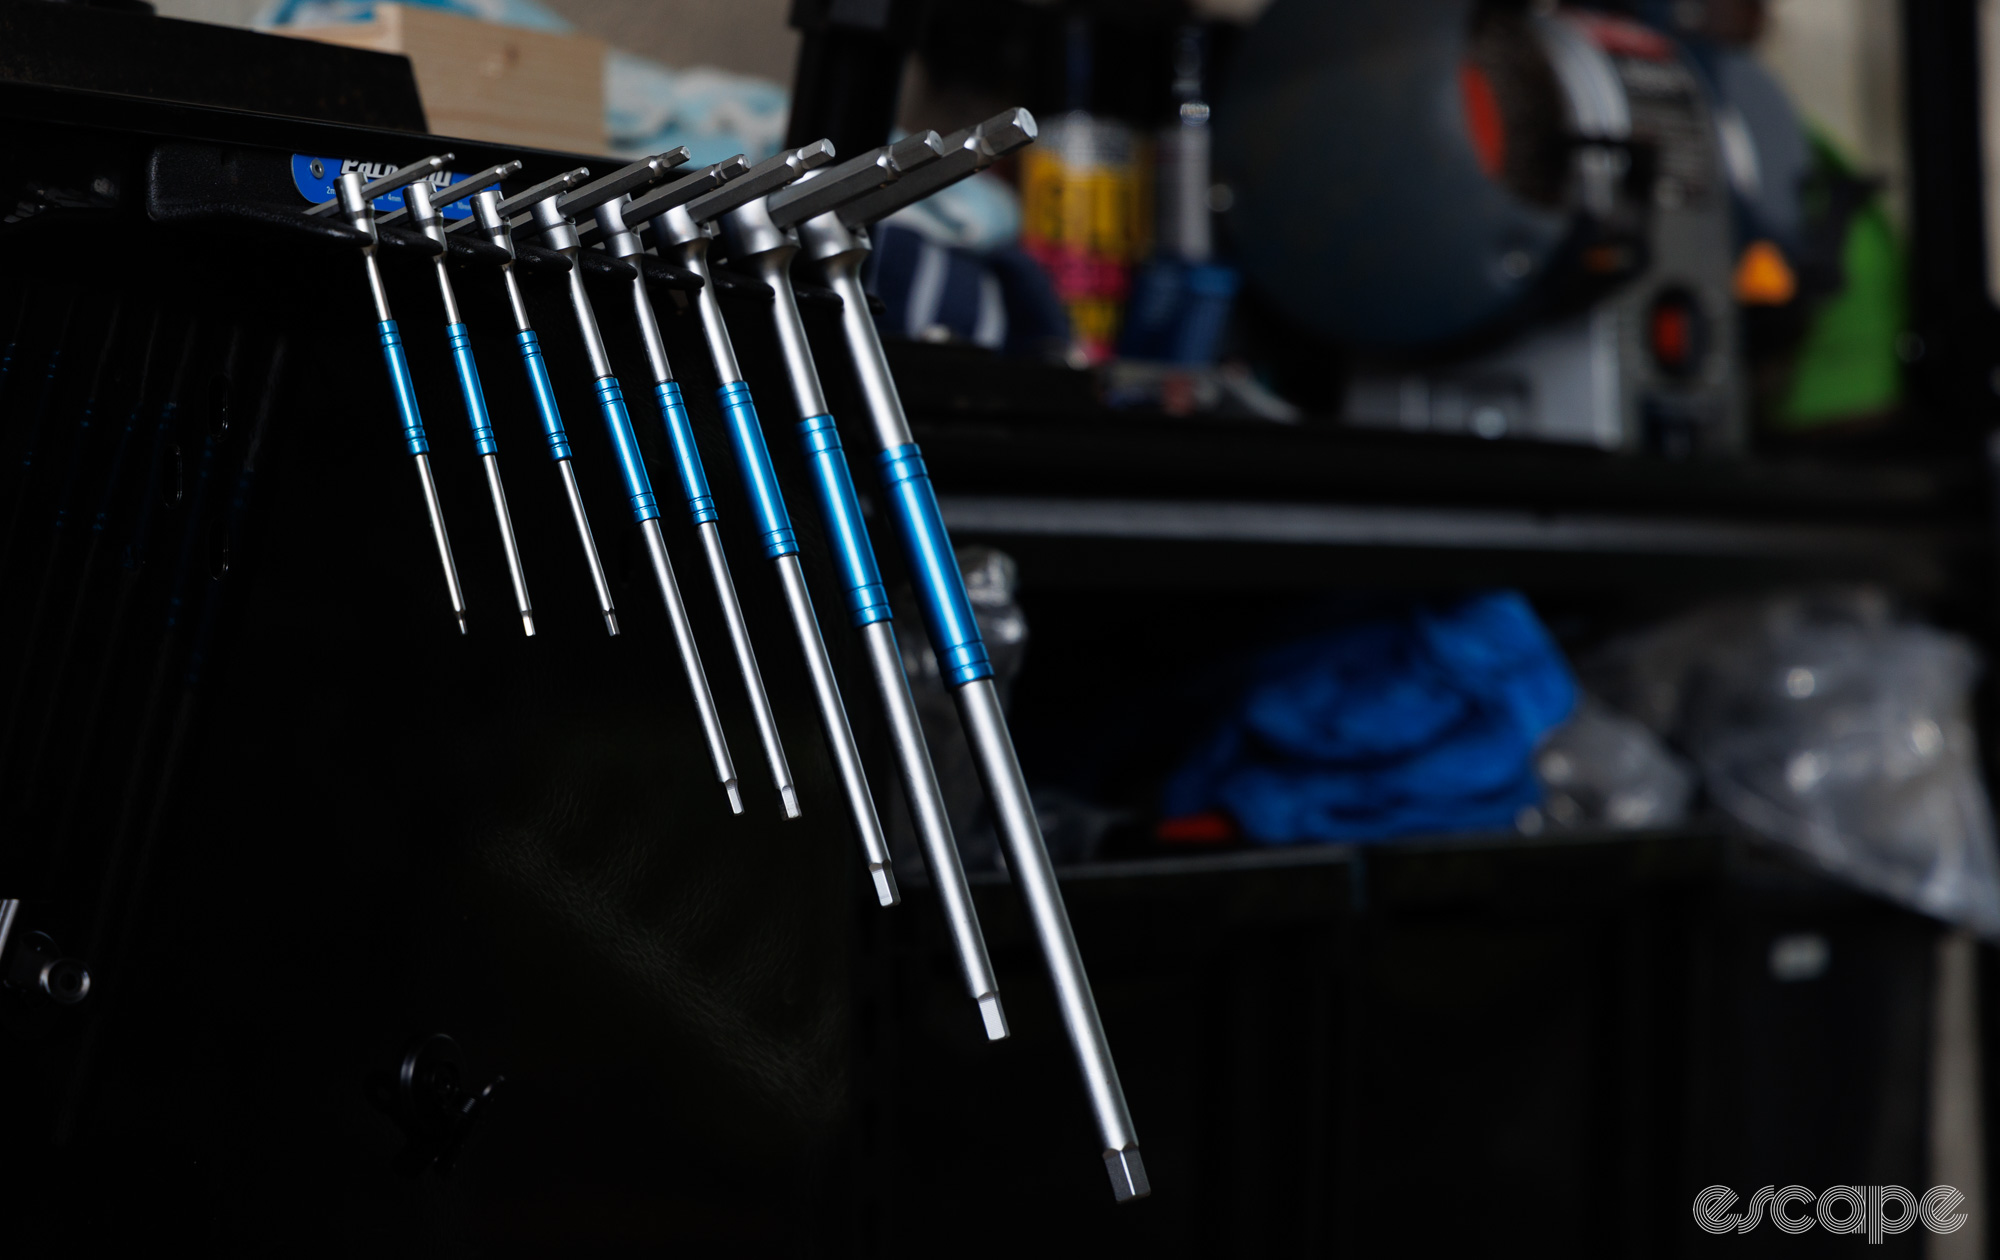 Park Tool T-handle hex wrench set hangs from its holder. 